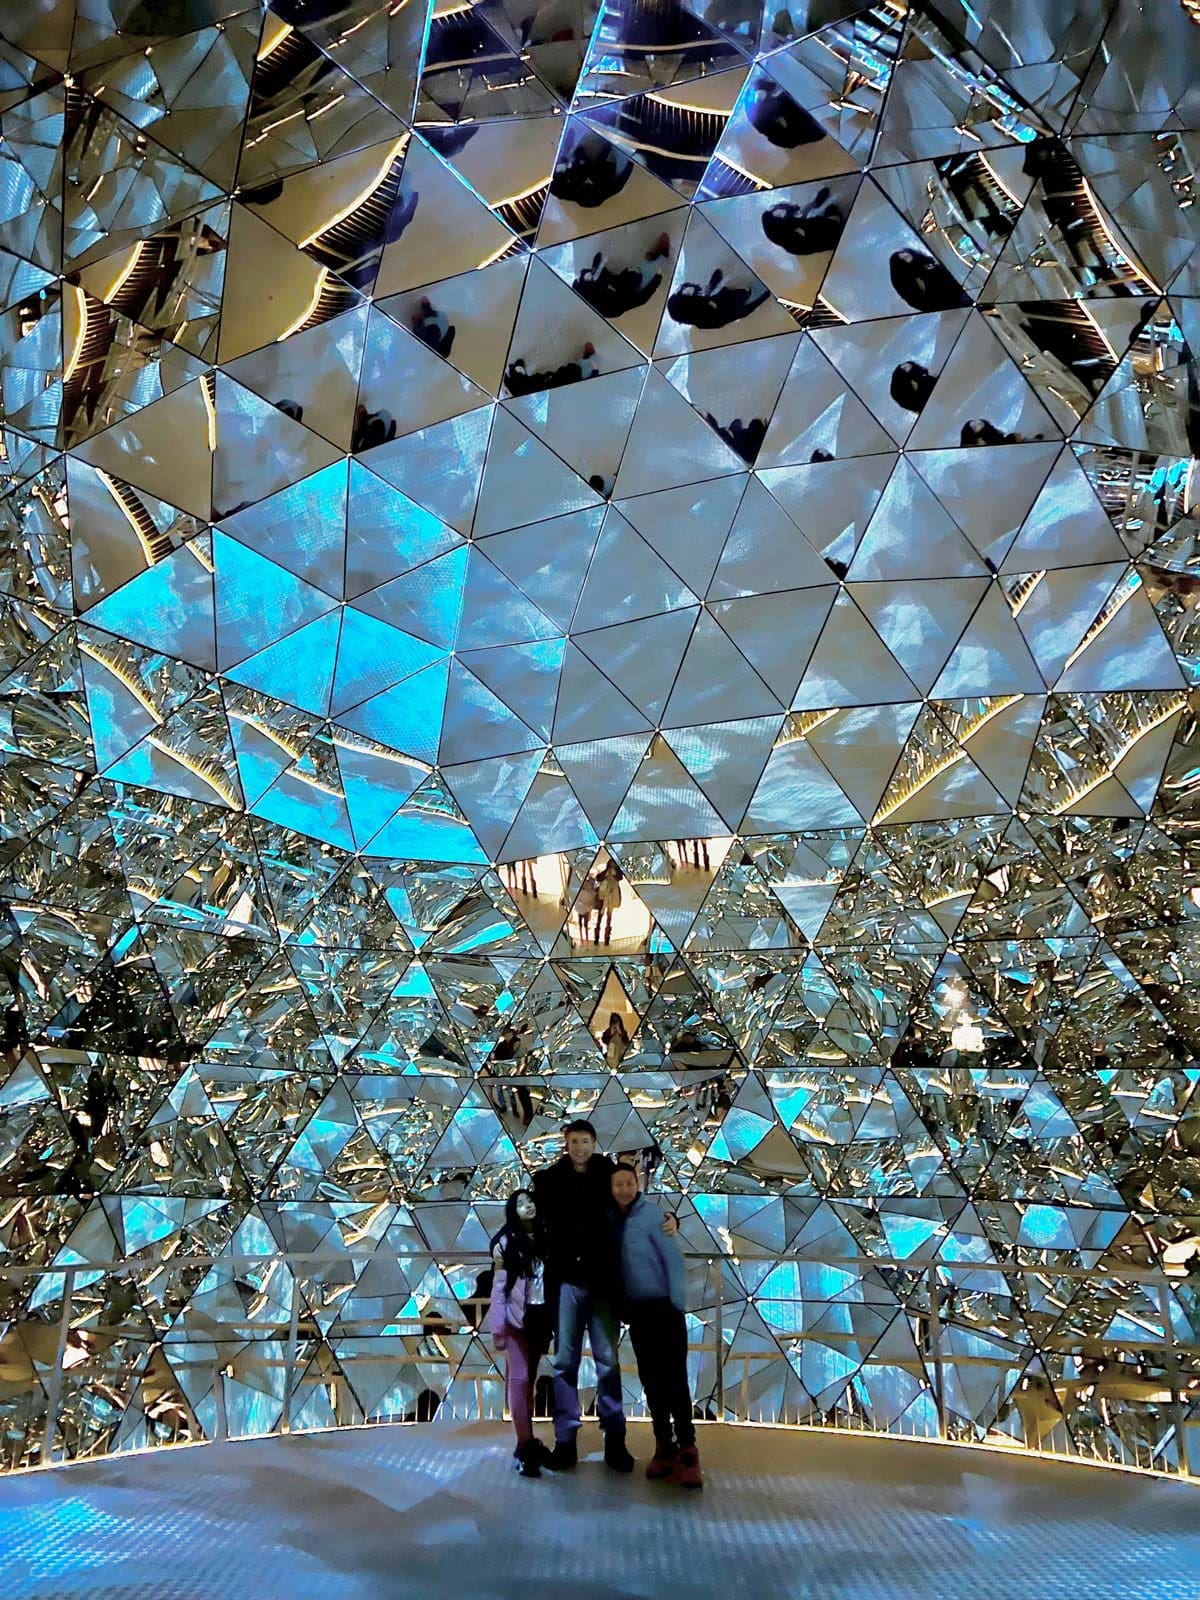 A dad and his two young kids stand together under a beautiful crystal display at Swarovski Kristallwelten, one of the best things to do near Innsbruck with kids this winter.